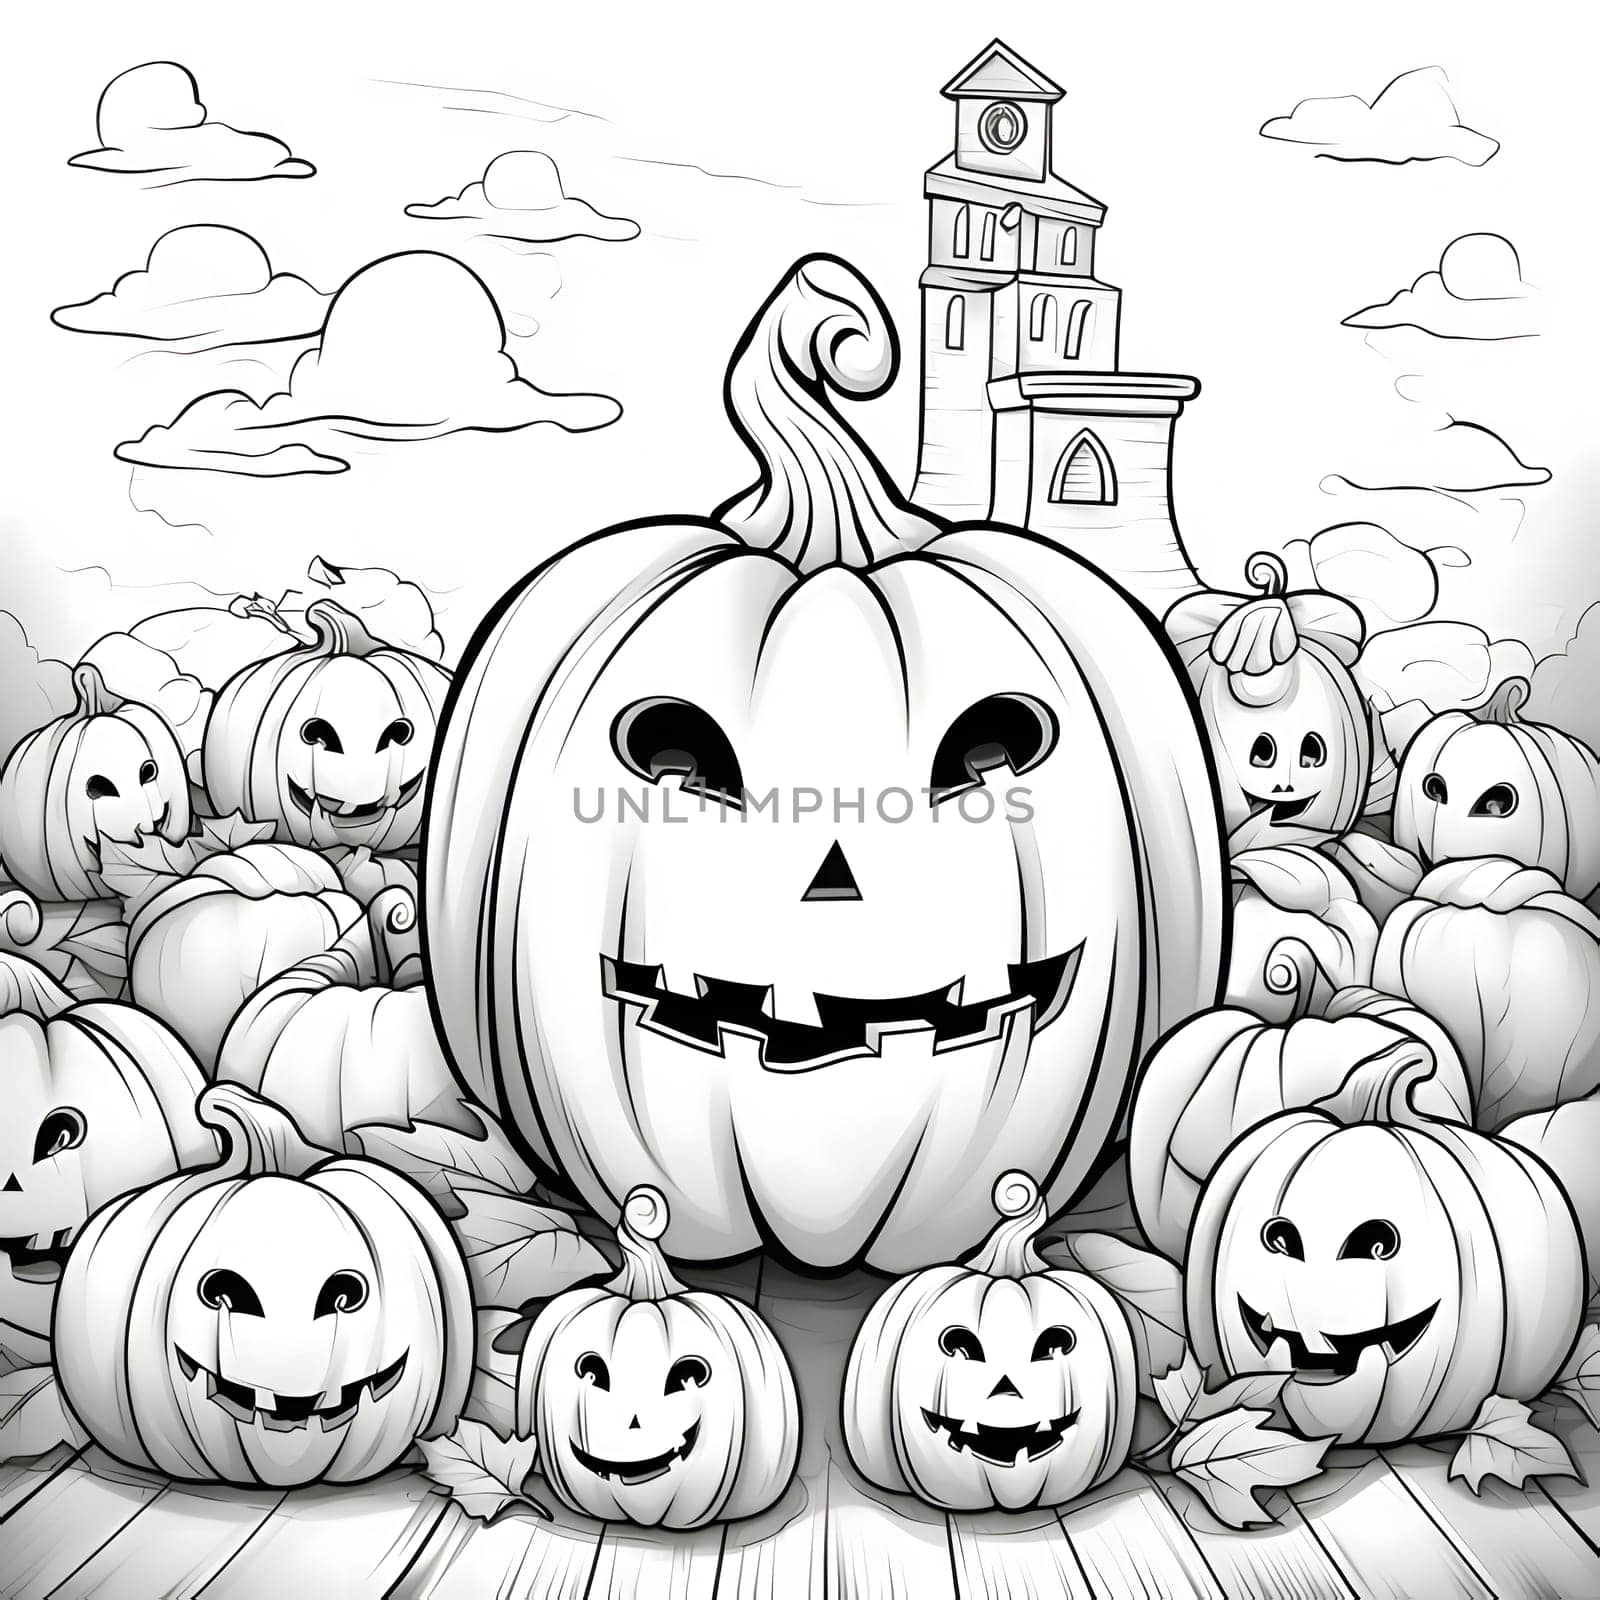 Large jack-o-lantern pumpkin, around smaller ones in the background building, Halloween black and white picture coloring book. Atmosphere of darkness and fear.